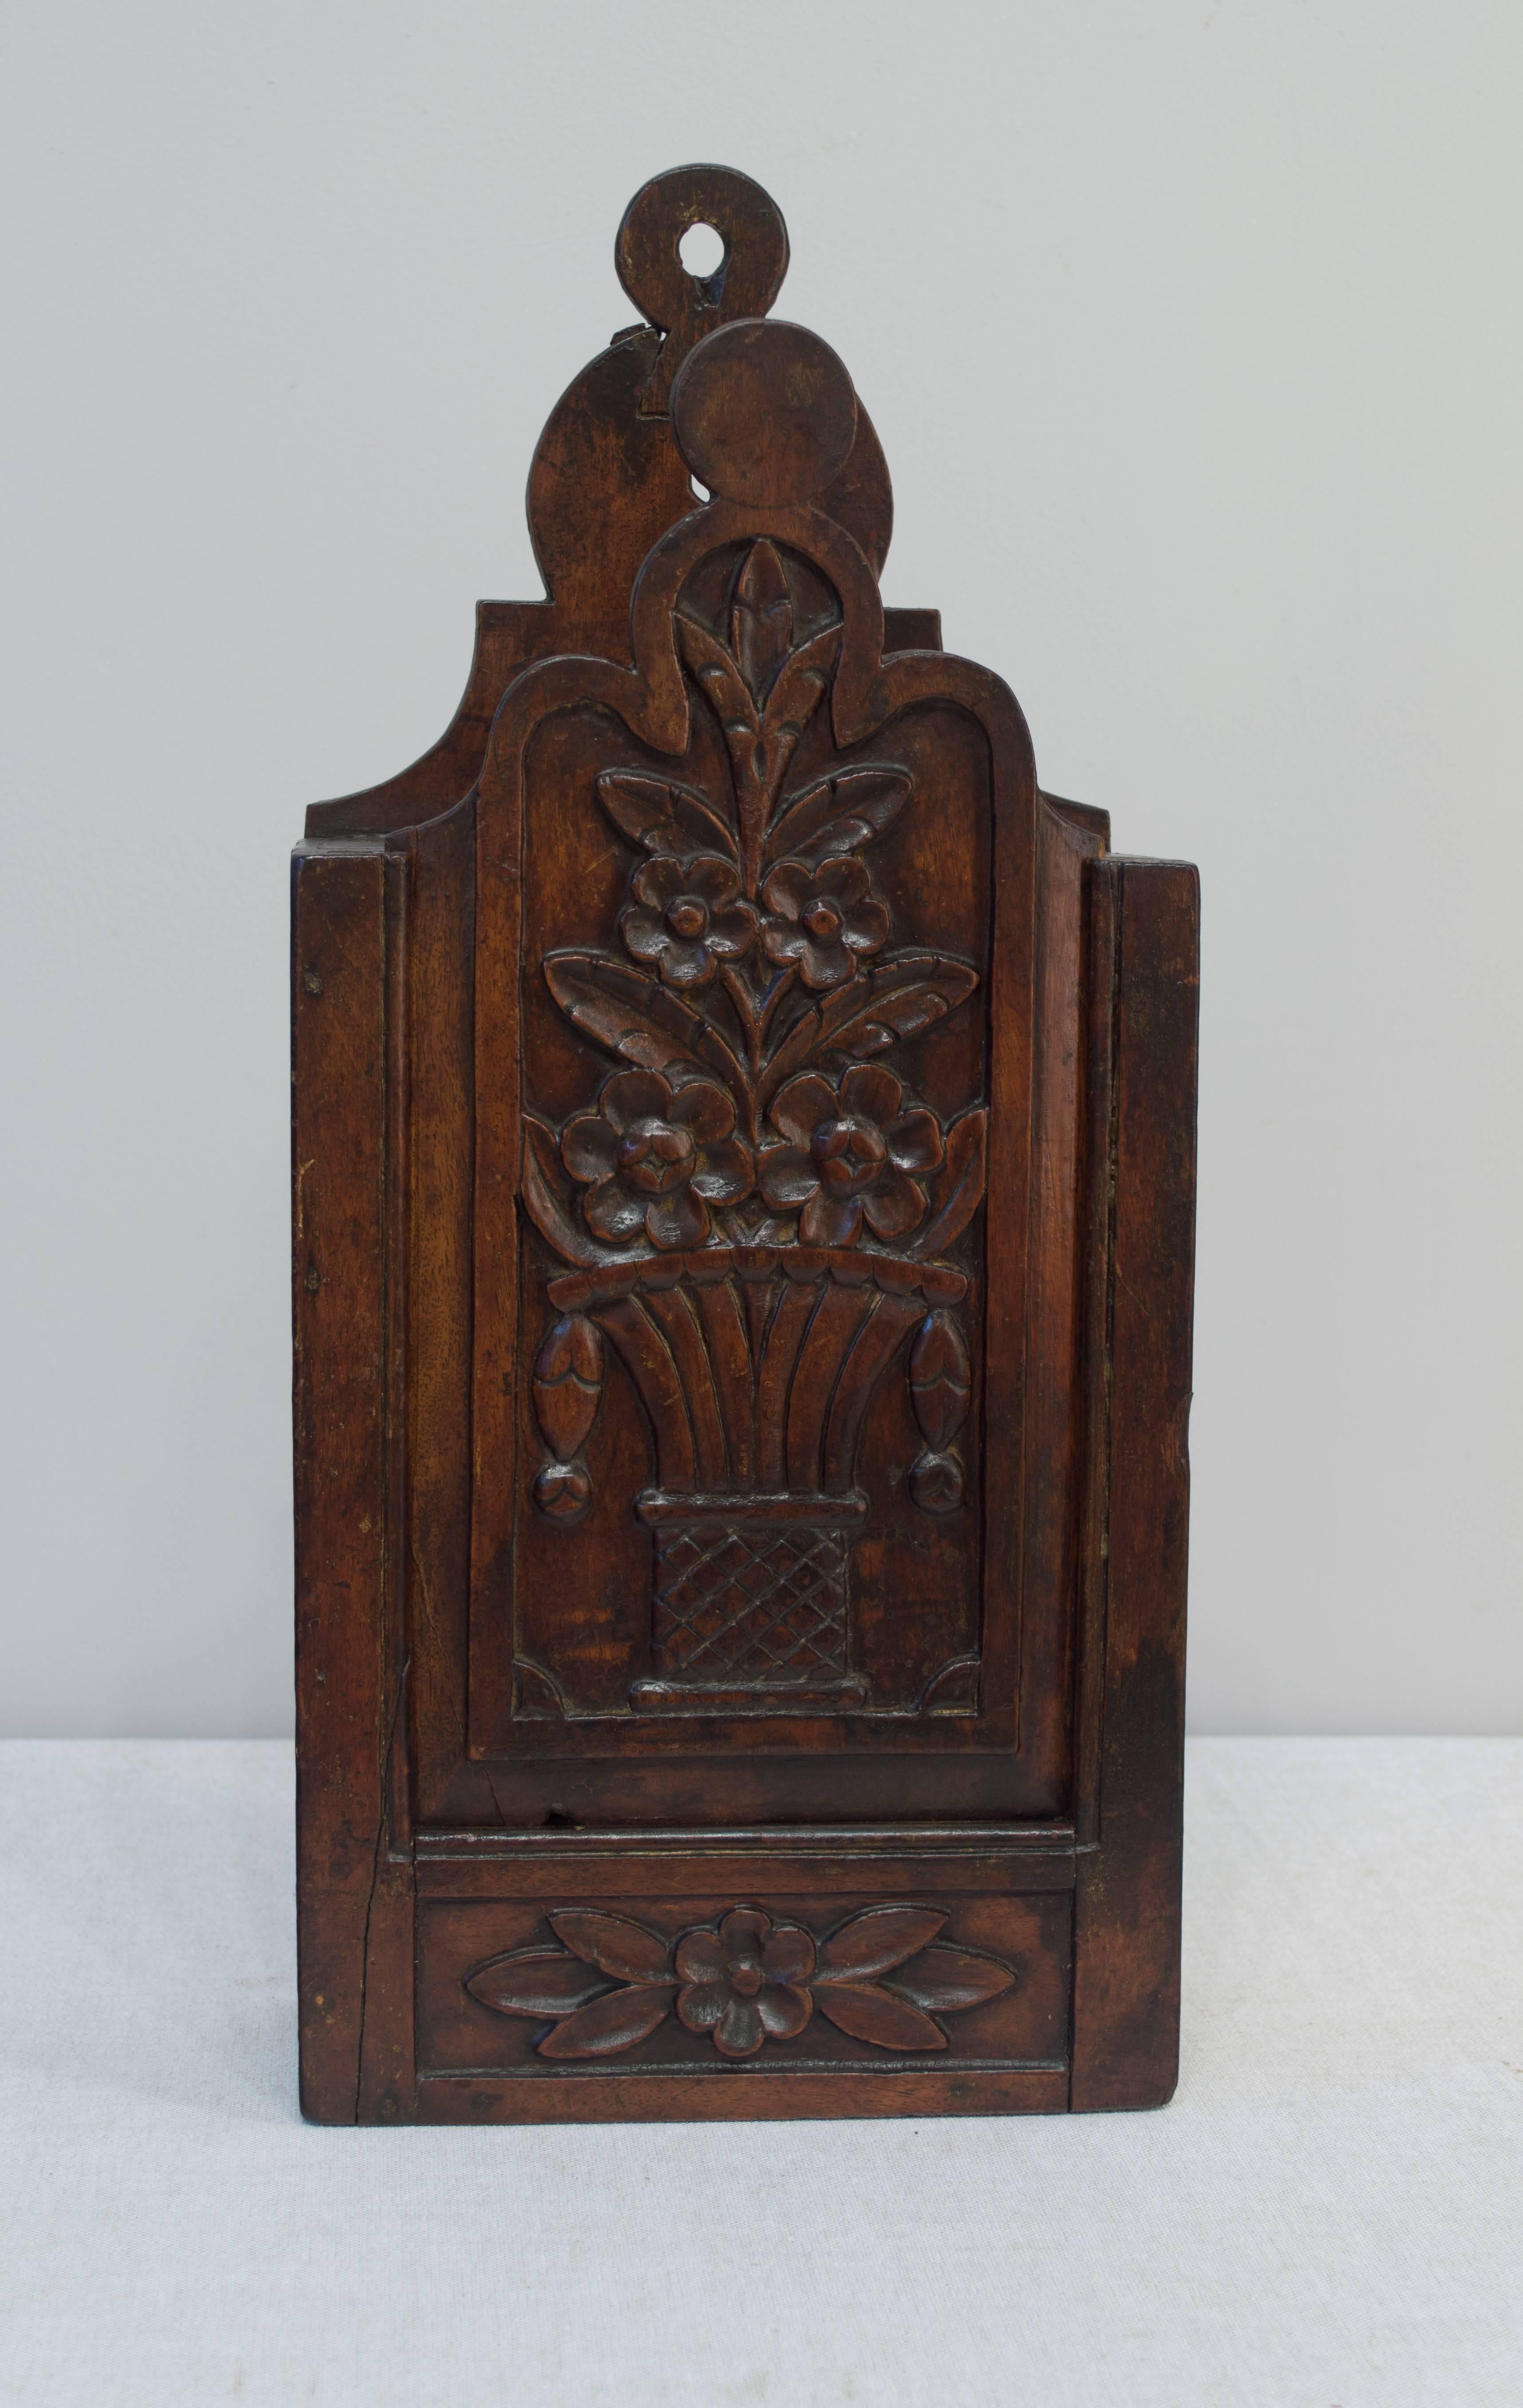 18th century French fariniere made of walnut with dovetail construction and nicely detailed hand-carved relief on front panel. From Provence, a fariniere is a sliding paneled box used for storing flour. Restoration on top.
More photos available upon